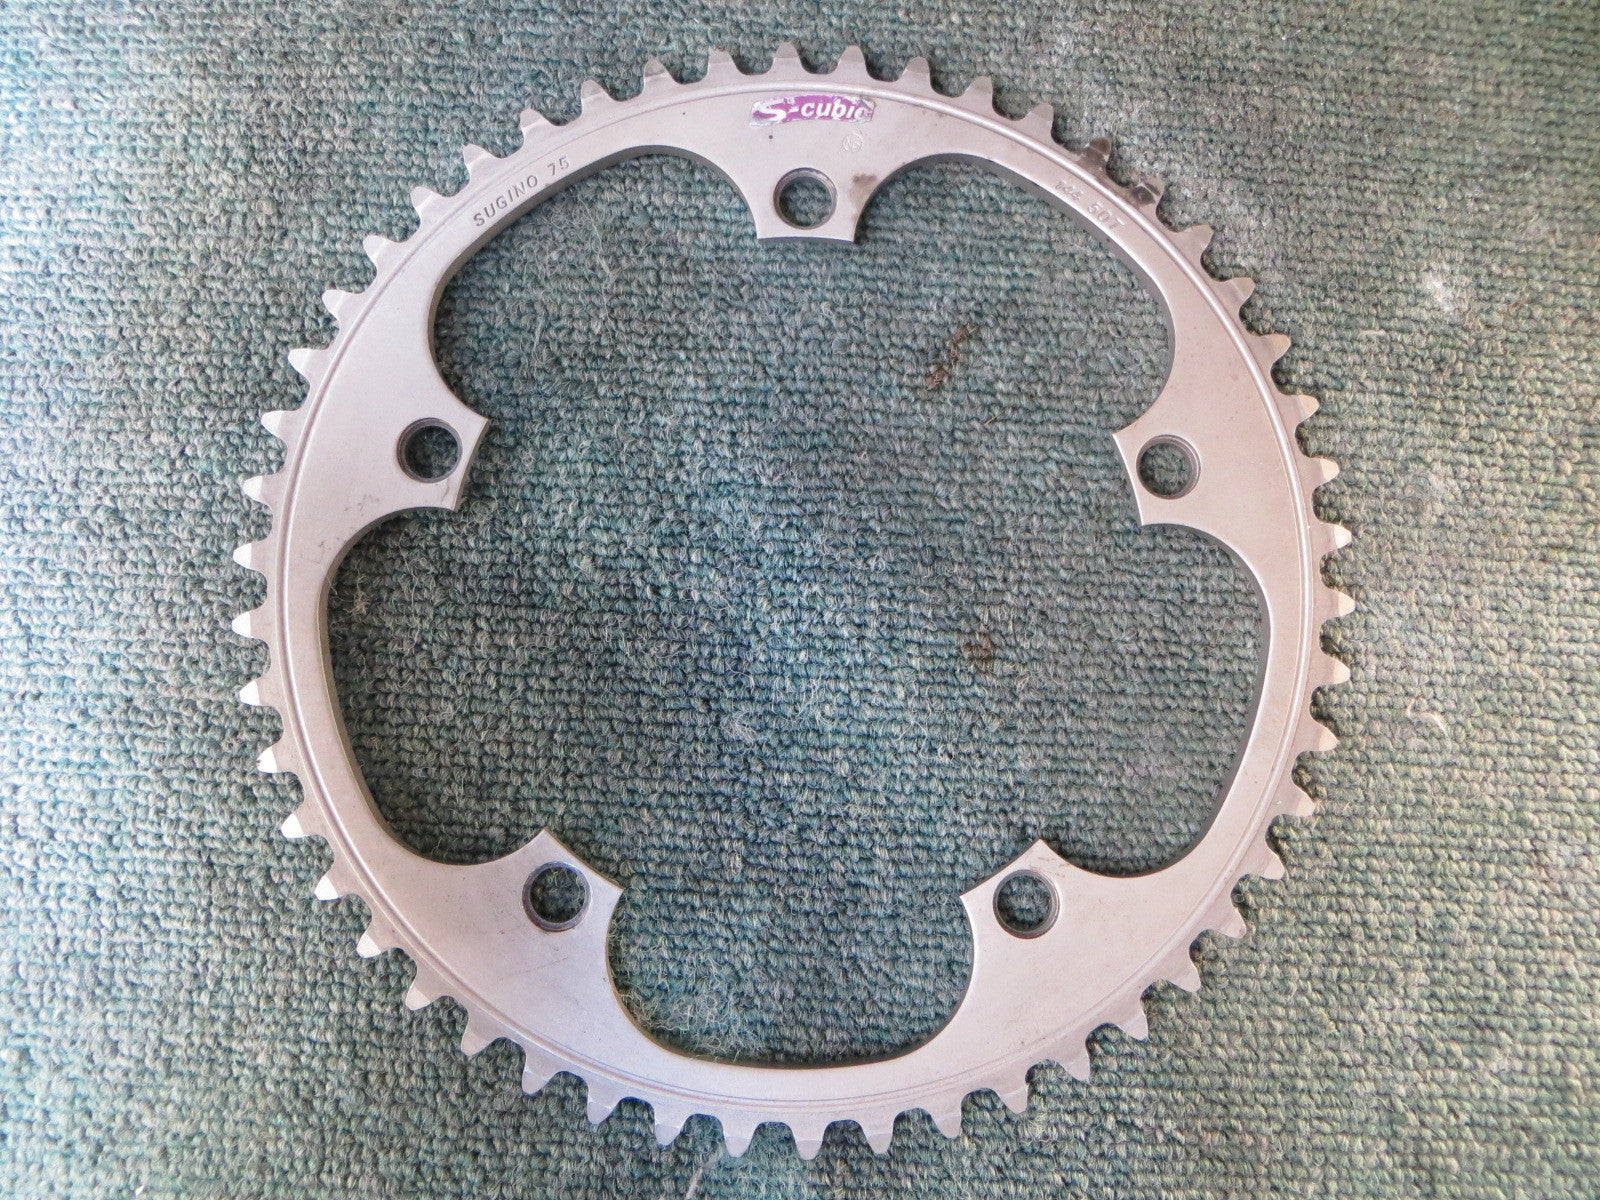 Sugino S-cubic 144BCD 1/8" NJS Matte Finish Chainring 50T (15112810)